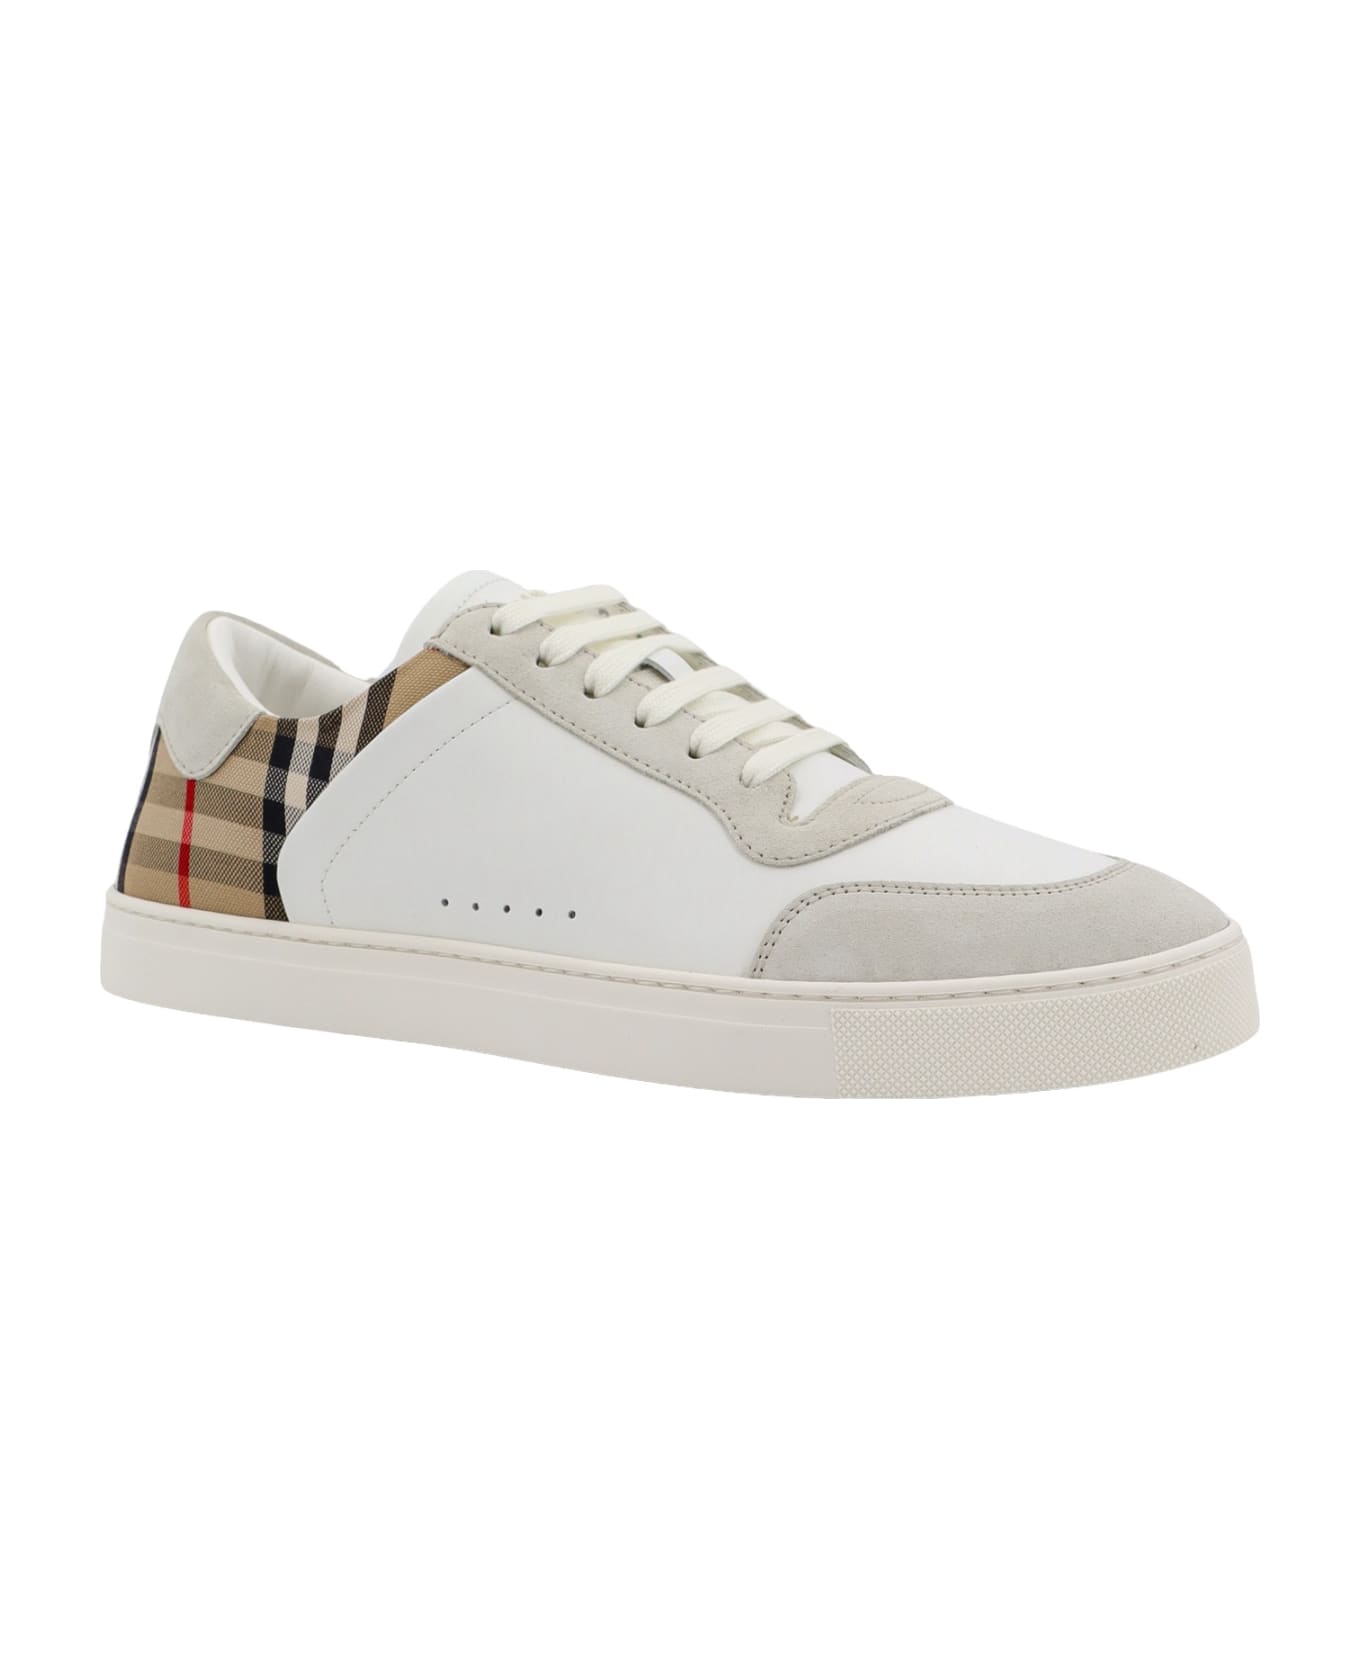 Burberry Multicolor Suede And Leather Sneakers - White スニーカー